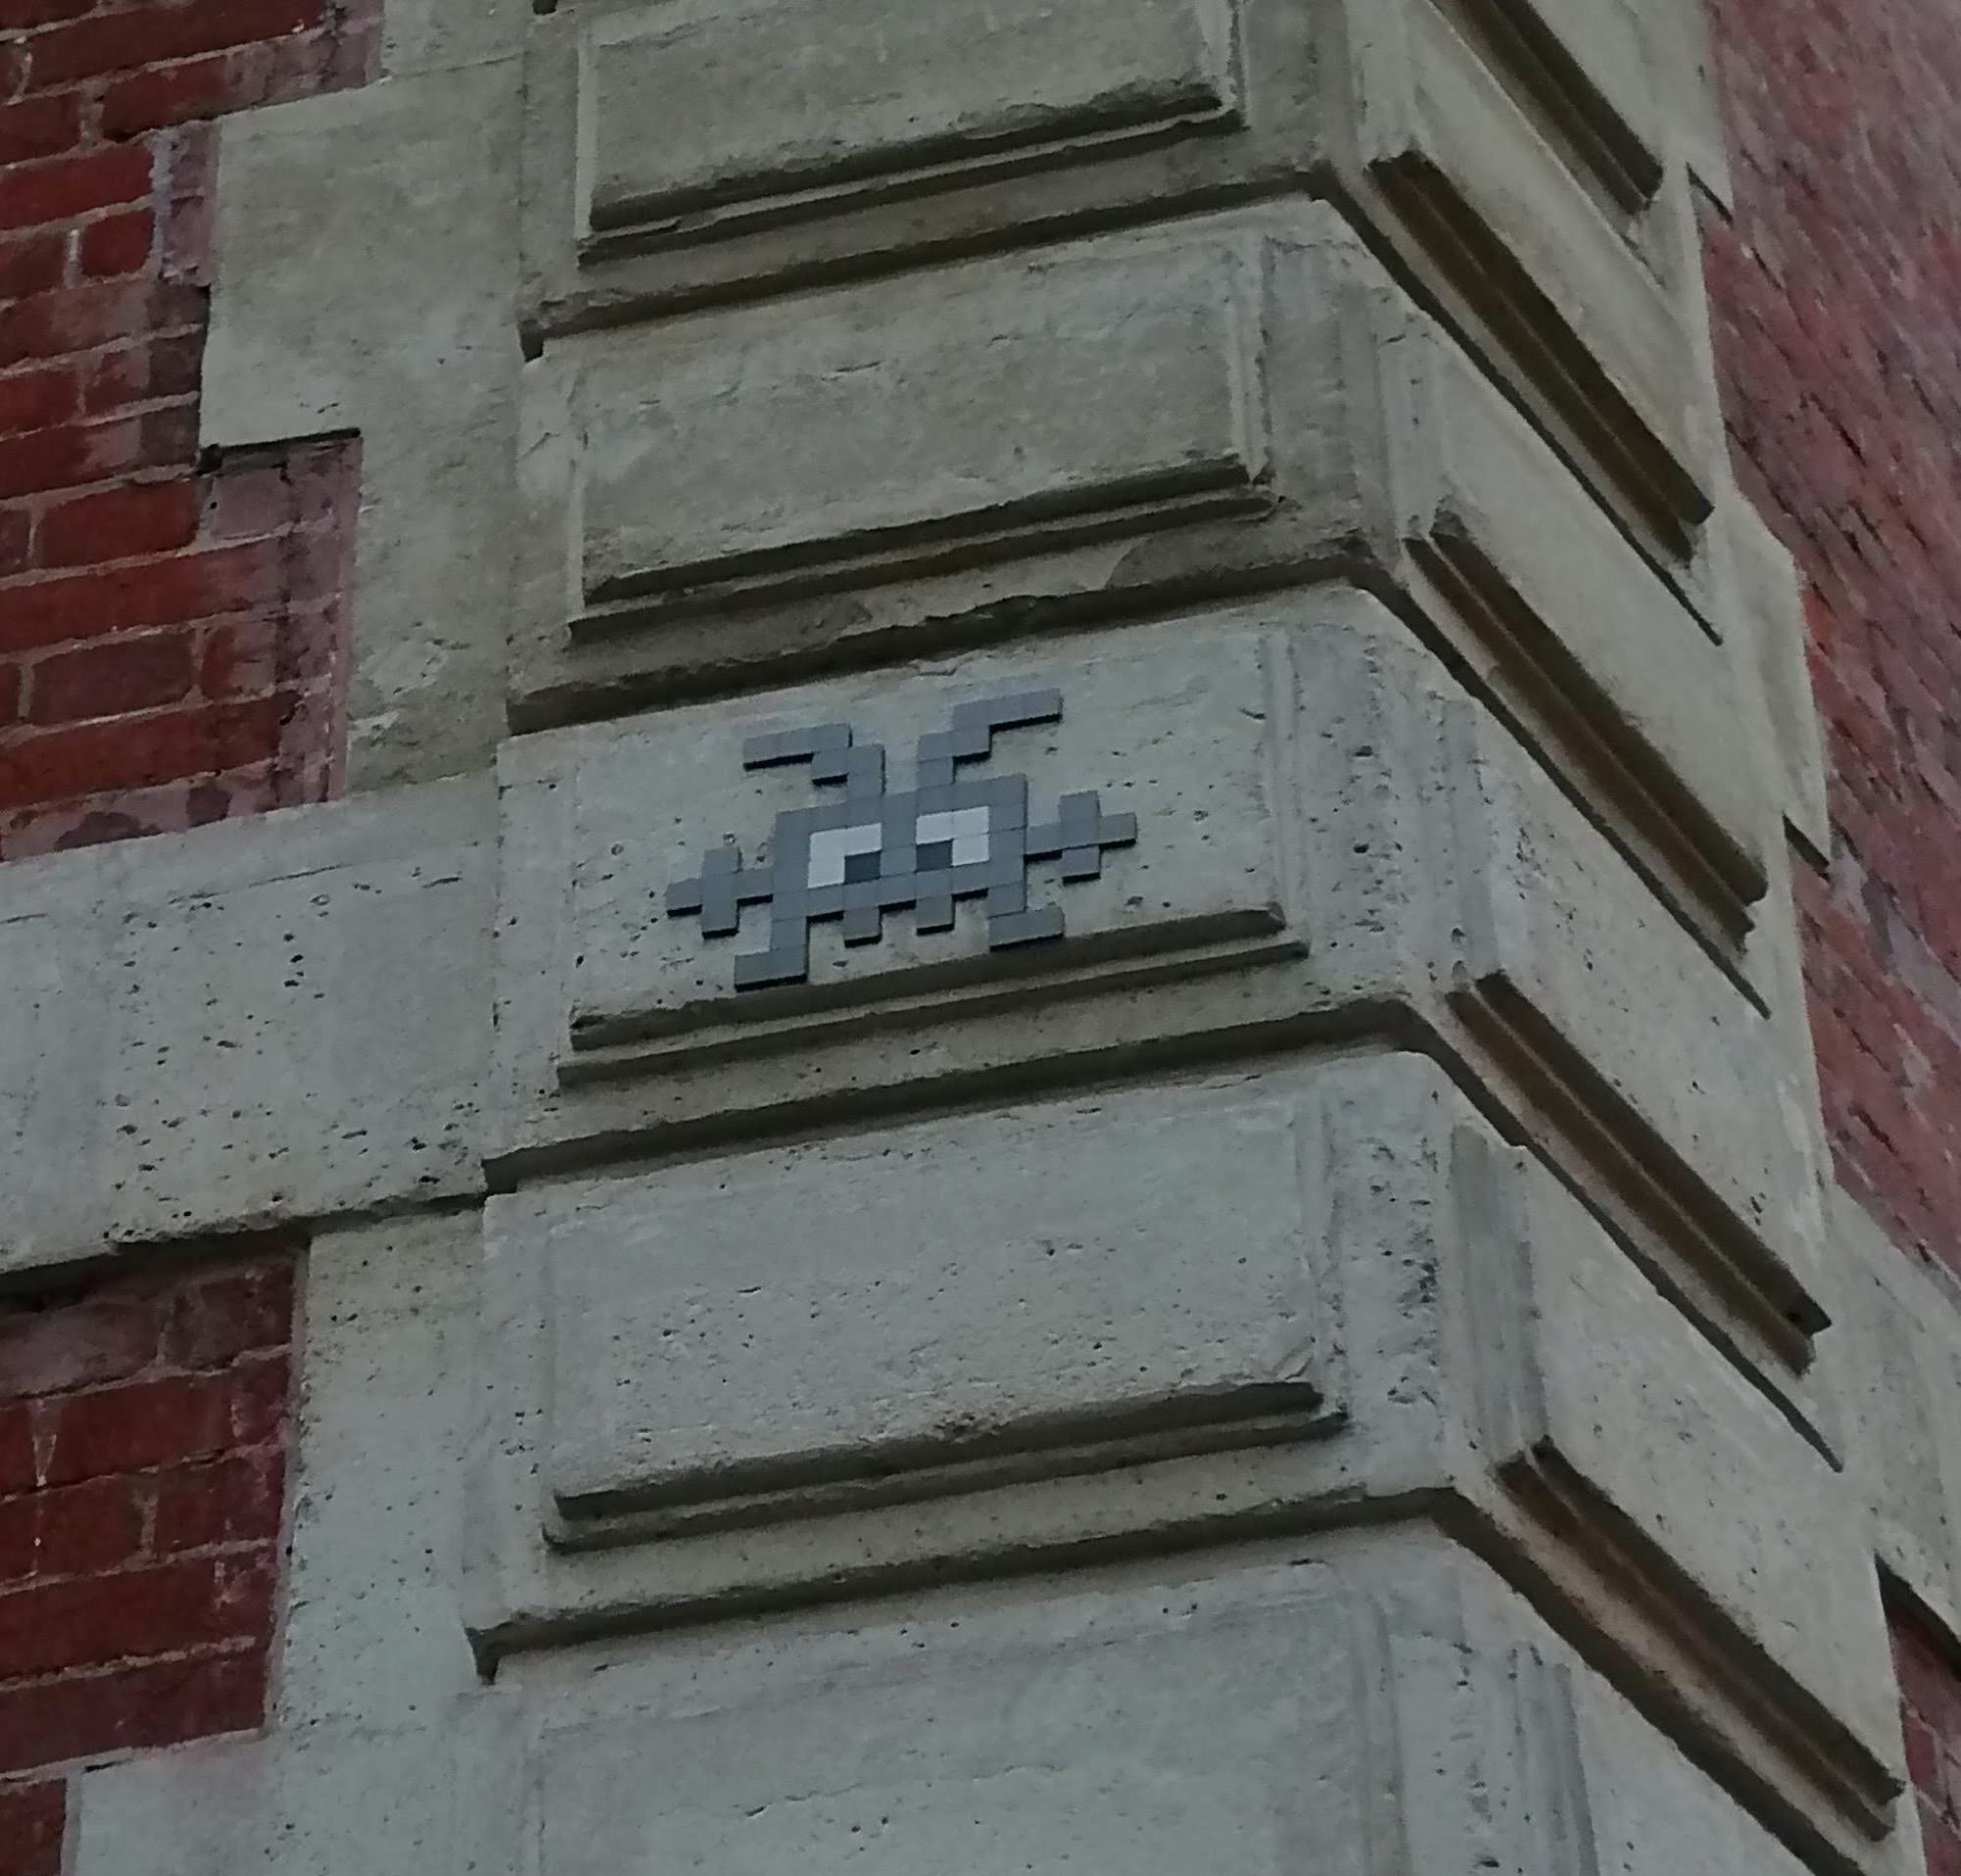 Mosaic 632  by the artist Invader captured by Rabot in Paris France